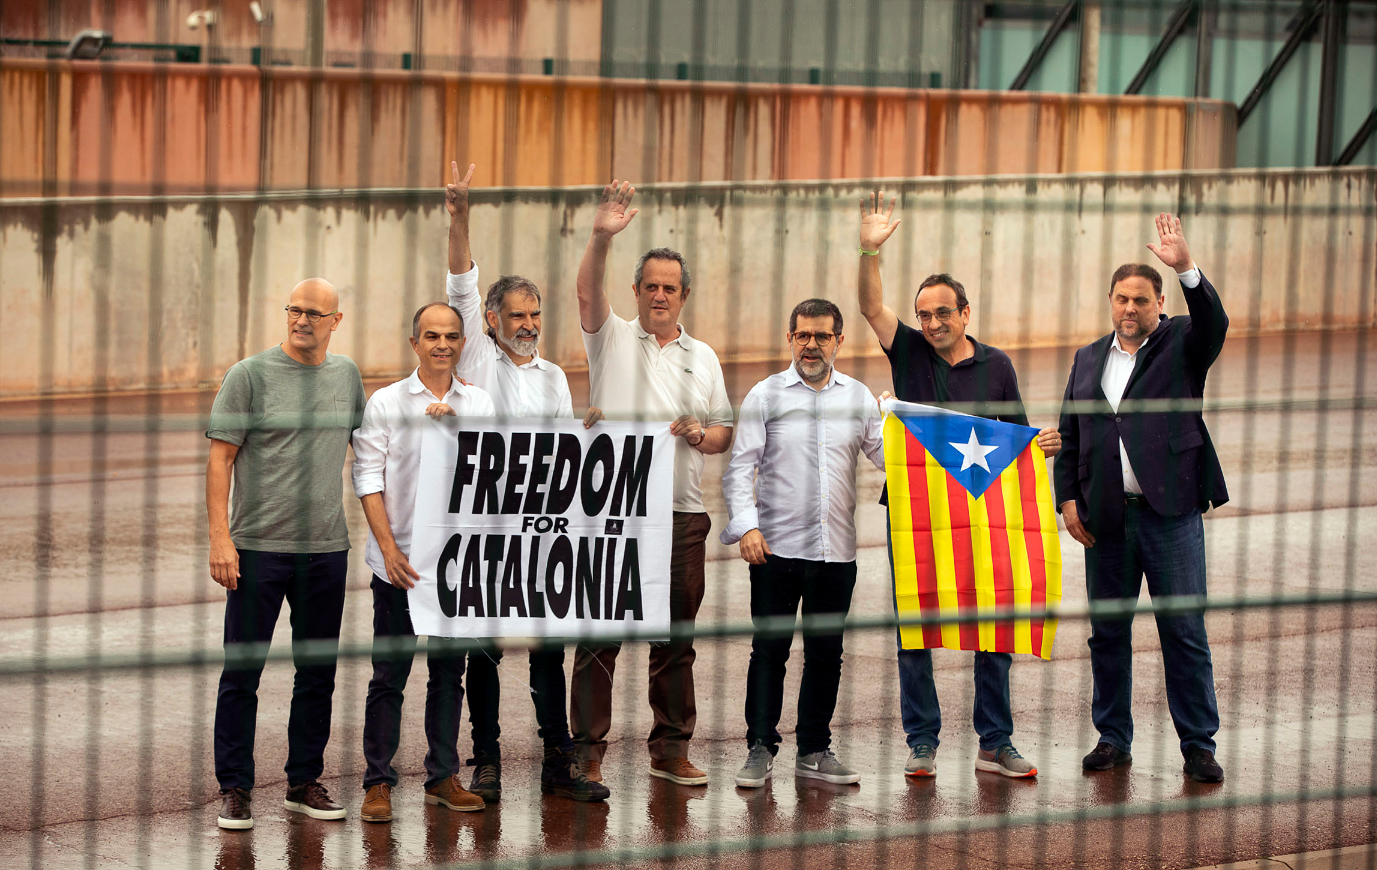 UN Human Rights Committee finds that the Spanish State violated Catalan political prisoners’ political rights